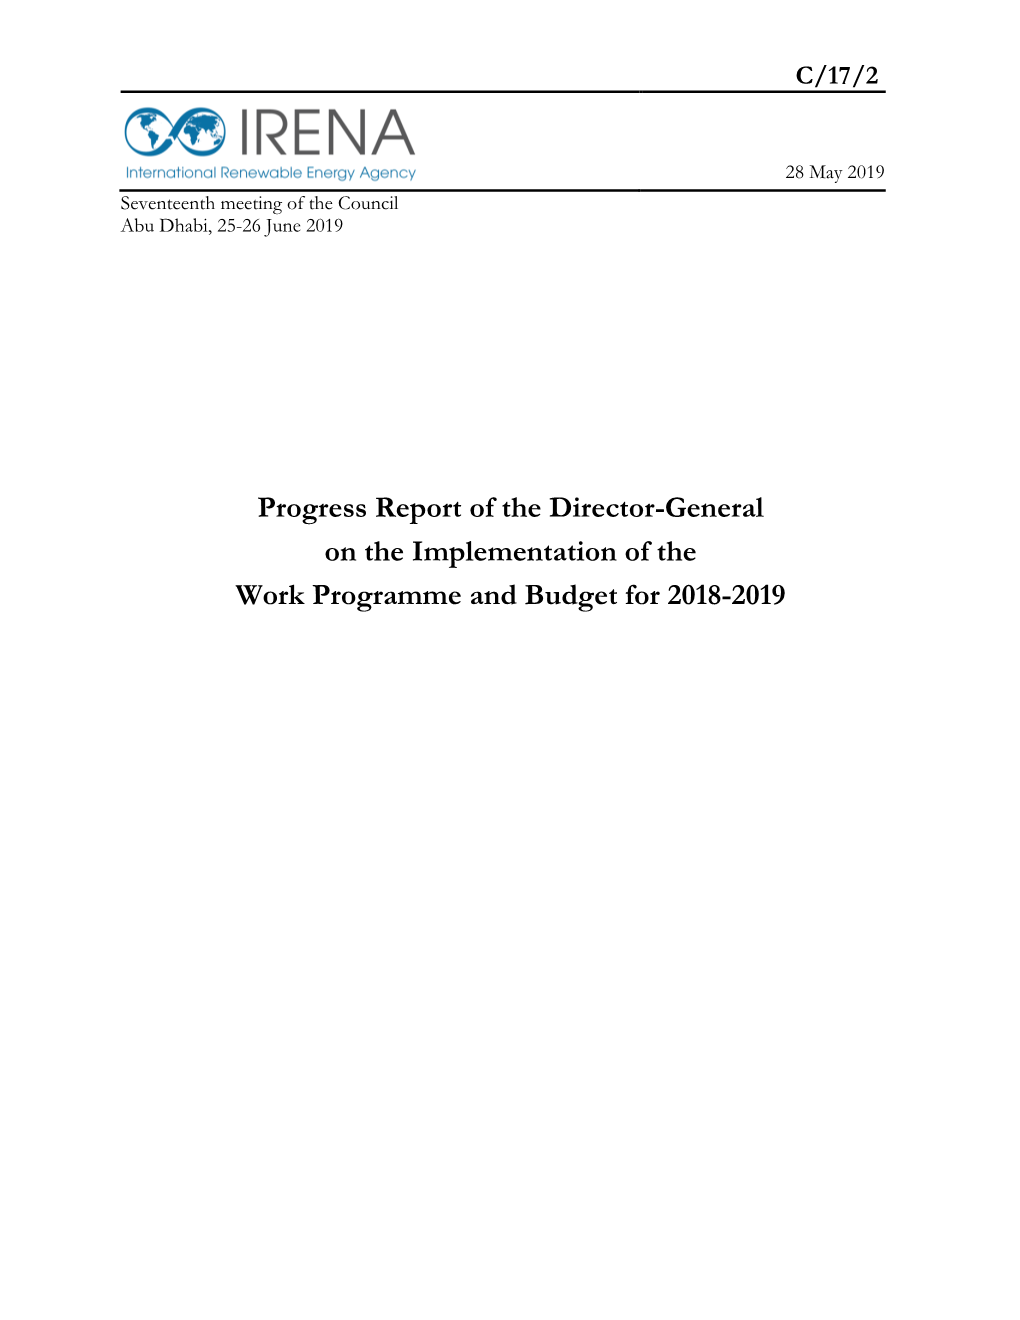 Progress Report of the Director-General on the Implementation of the Work Programme and Budget for 2018-2019